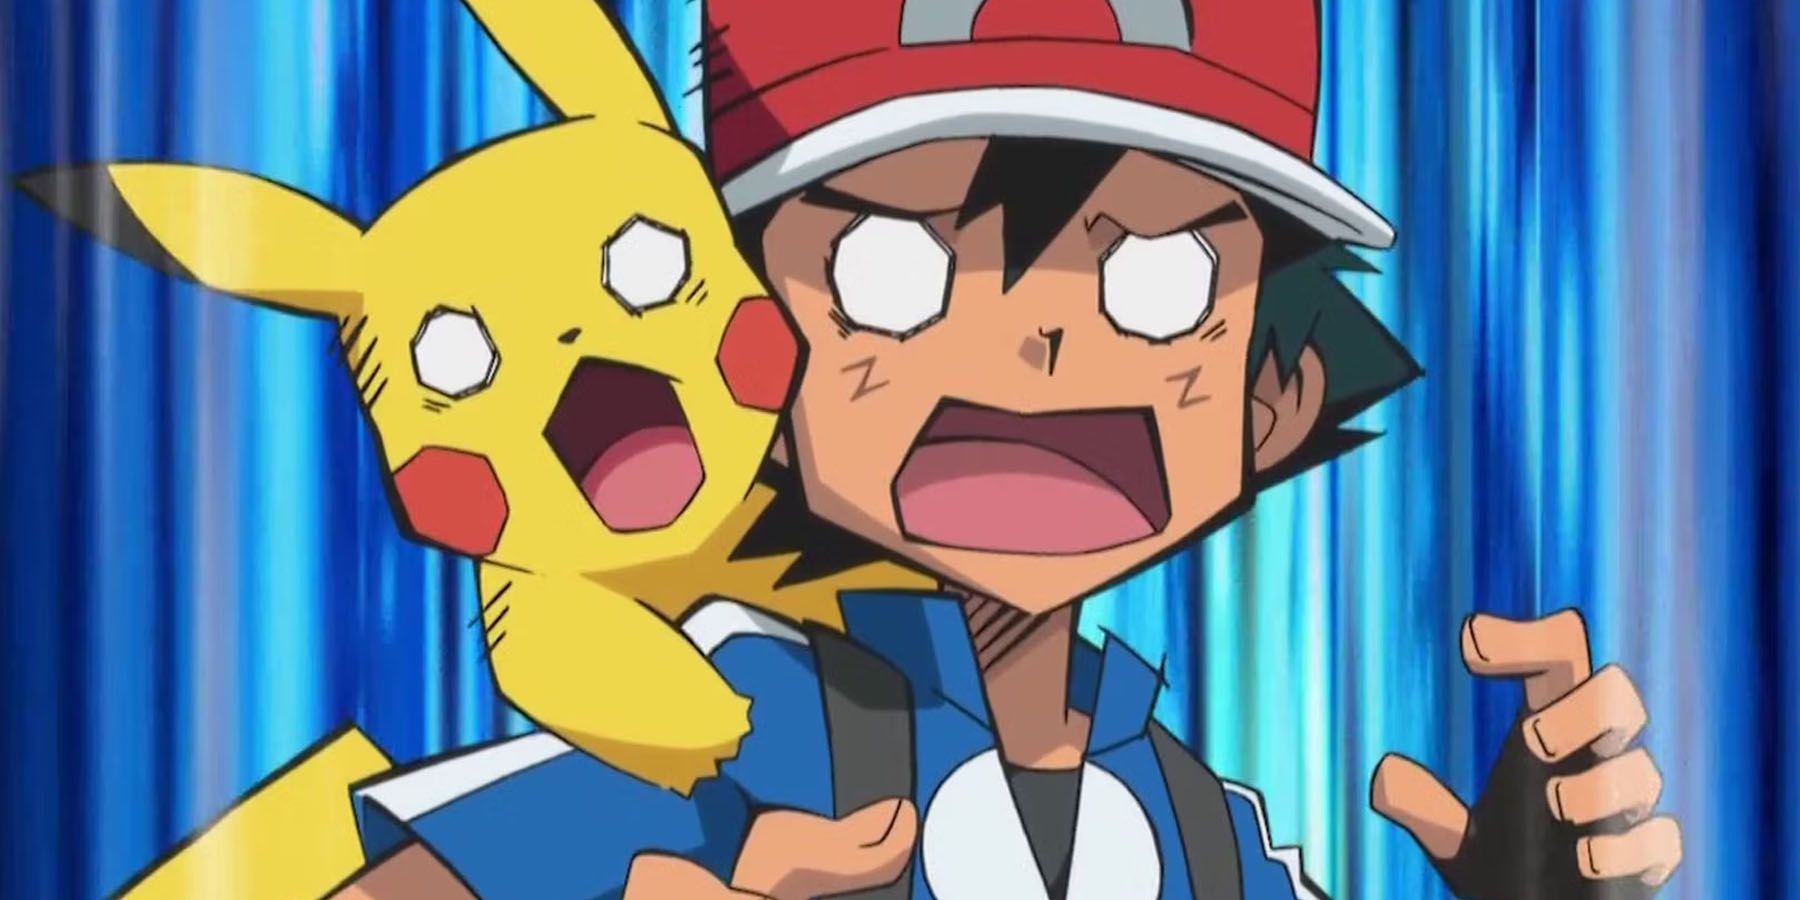 A screenshot of Ash and Pikachu looking in shock in the Pokemon anime.